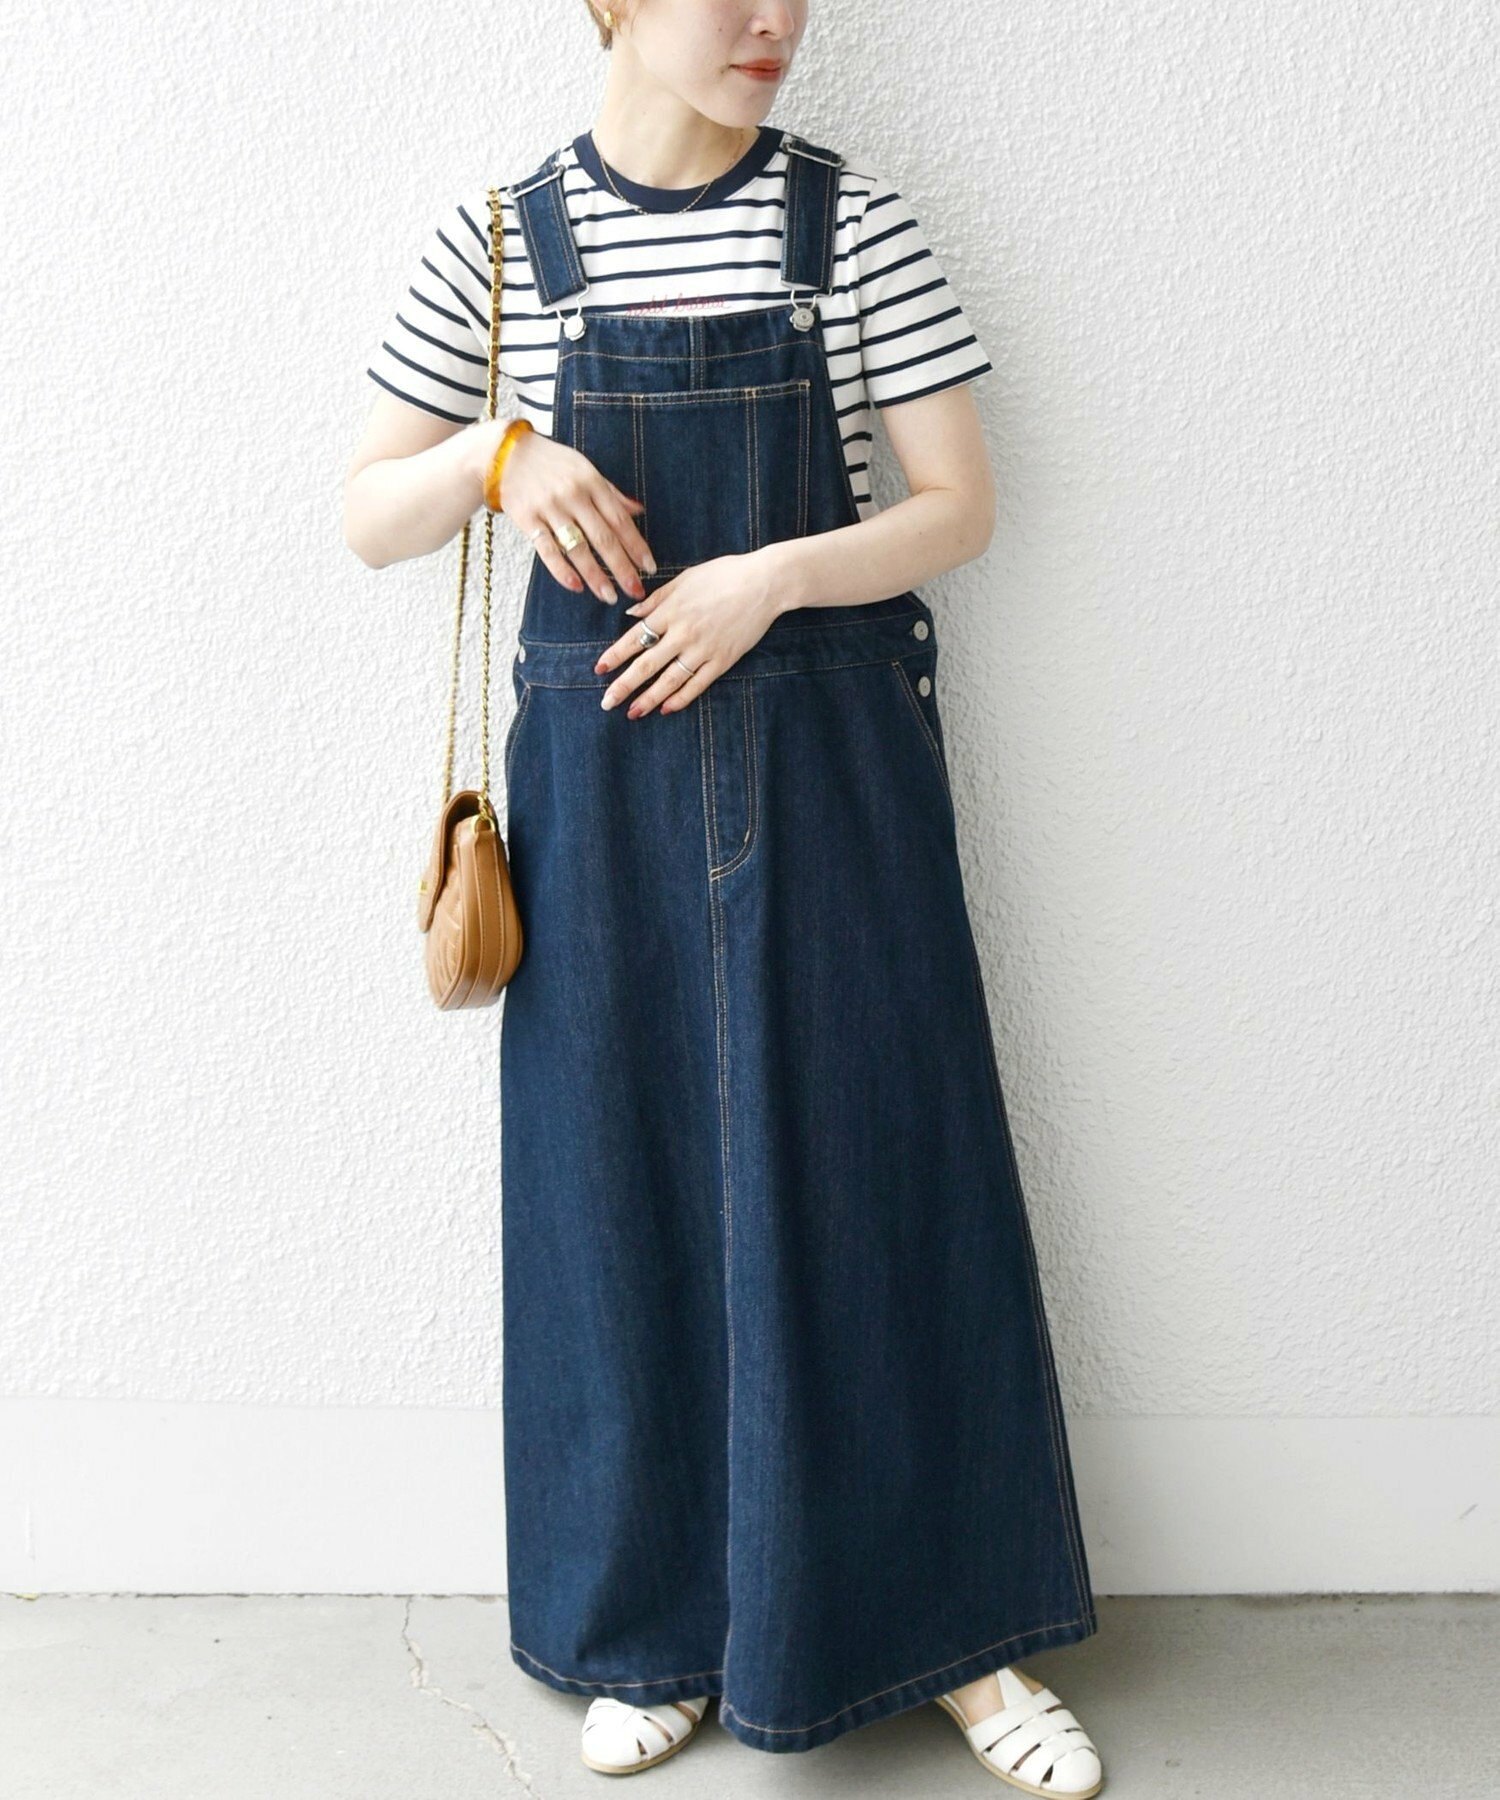 【SHIPS any別注】PETIT BATEAU:<洗濯機可能>ロゴ プリント ボーダー 半袖 Tシャツ 23SS